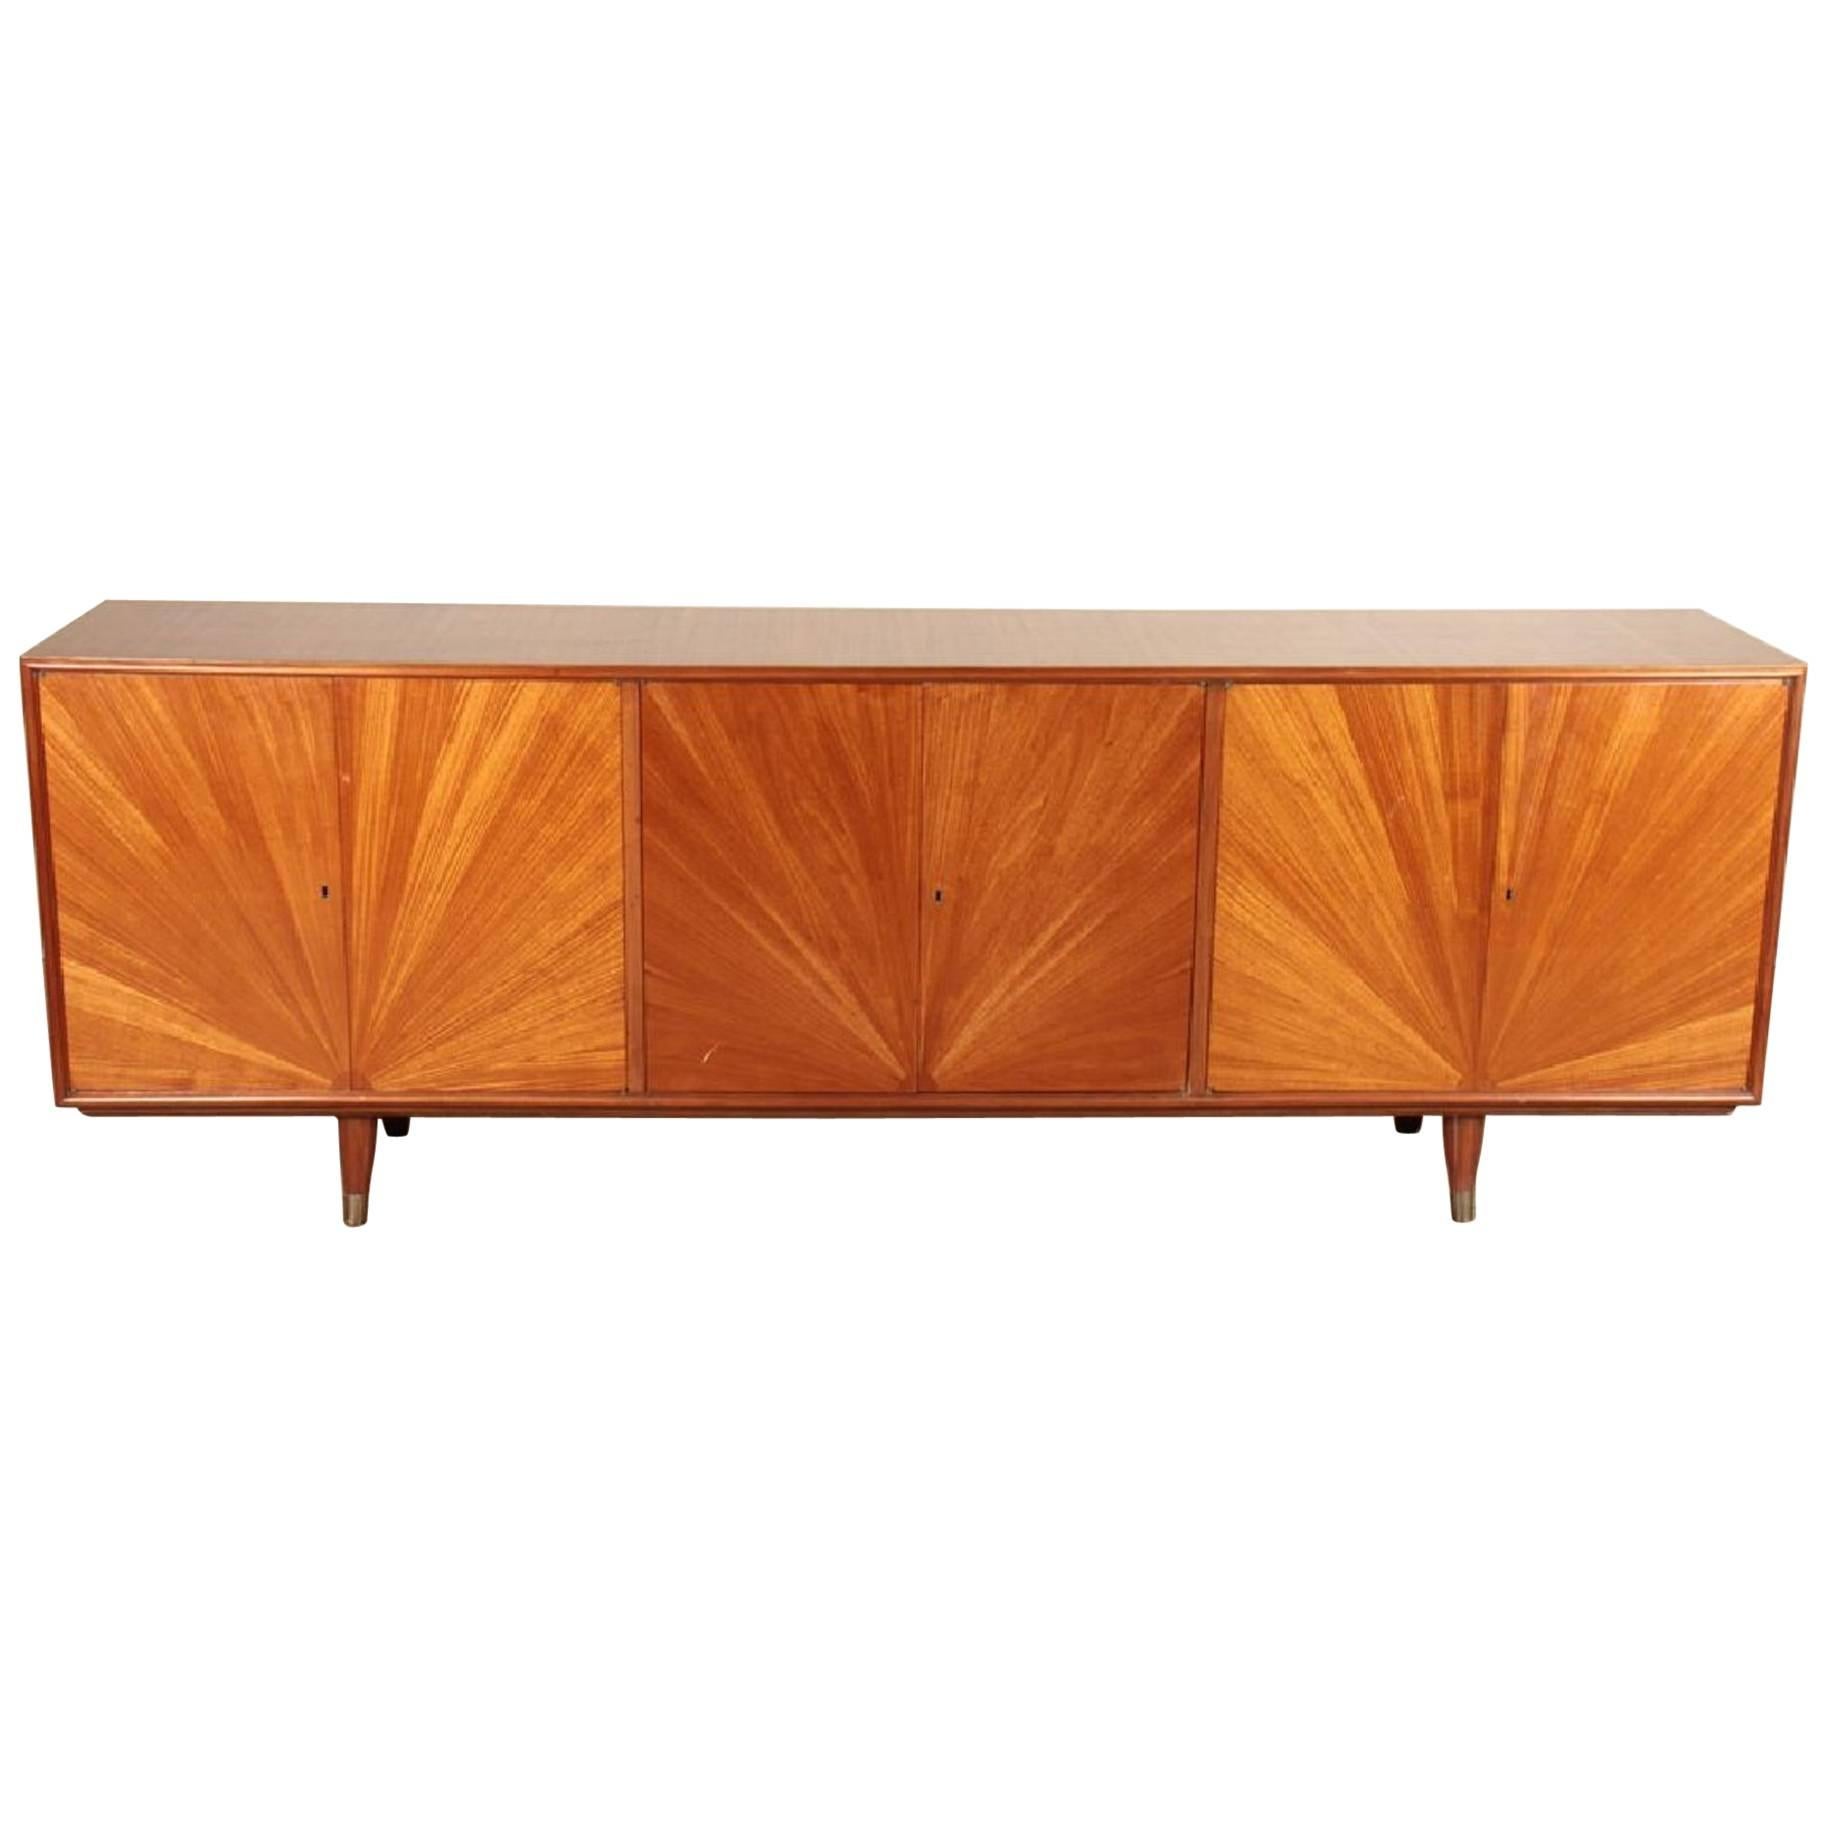 African Mahogany Sideboard with Starburst Design, circa 1960